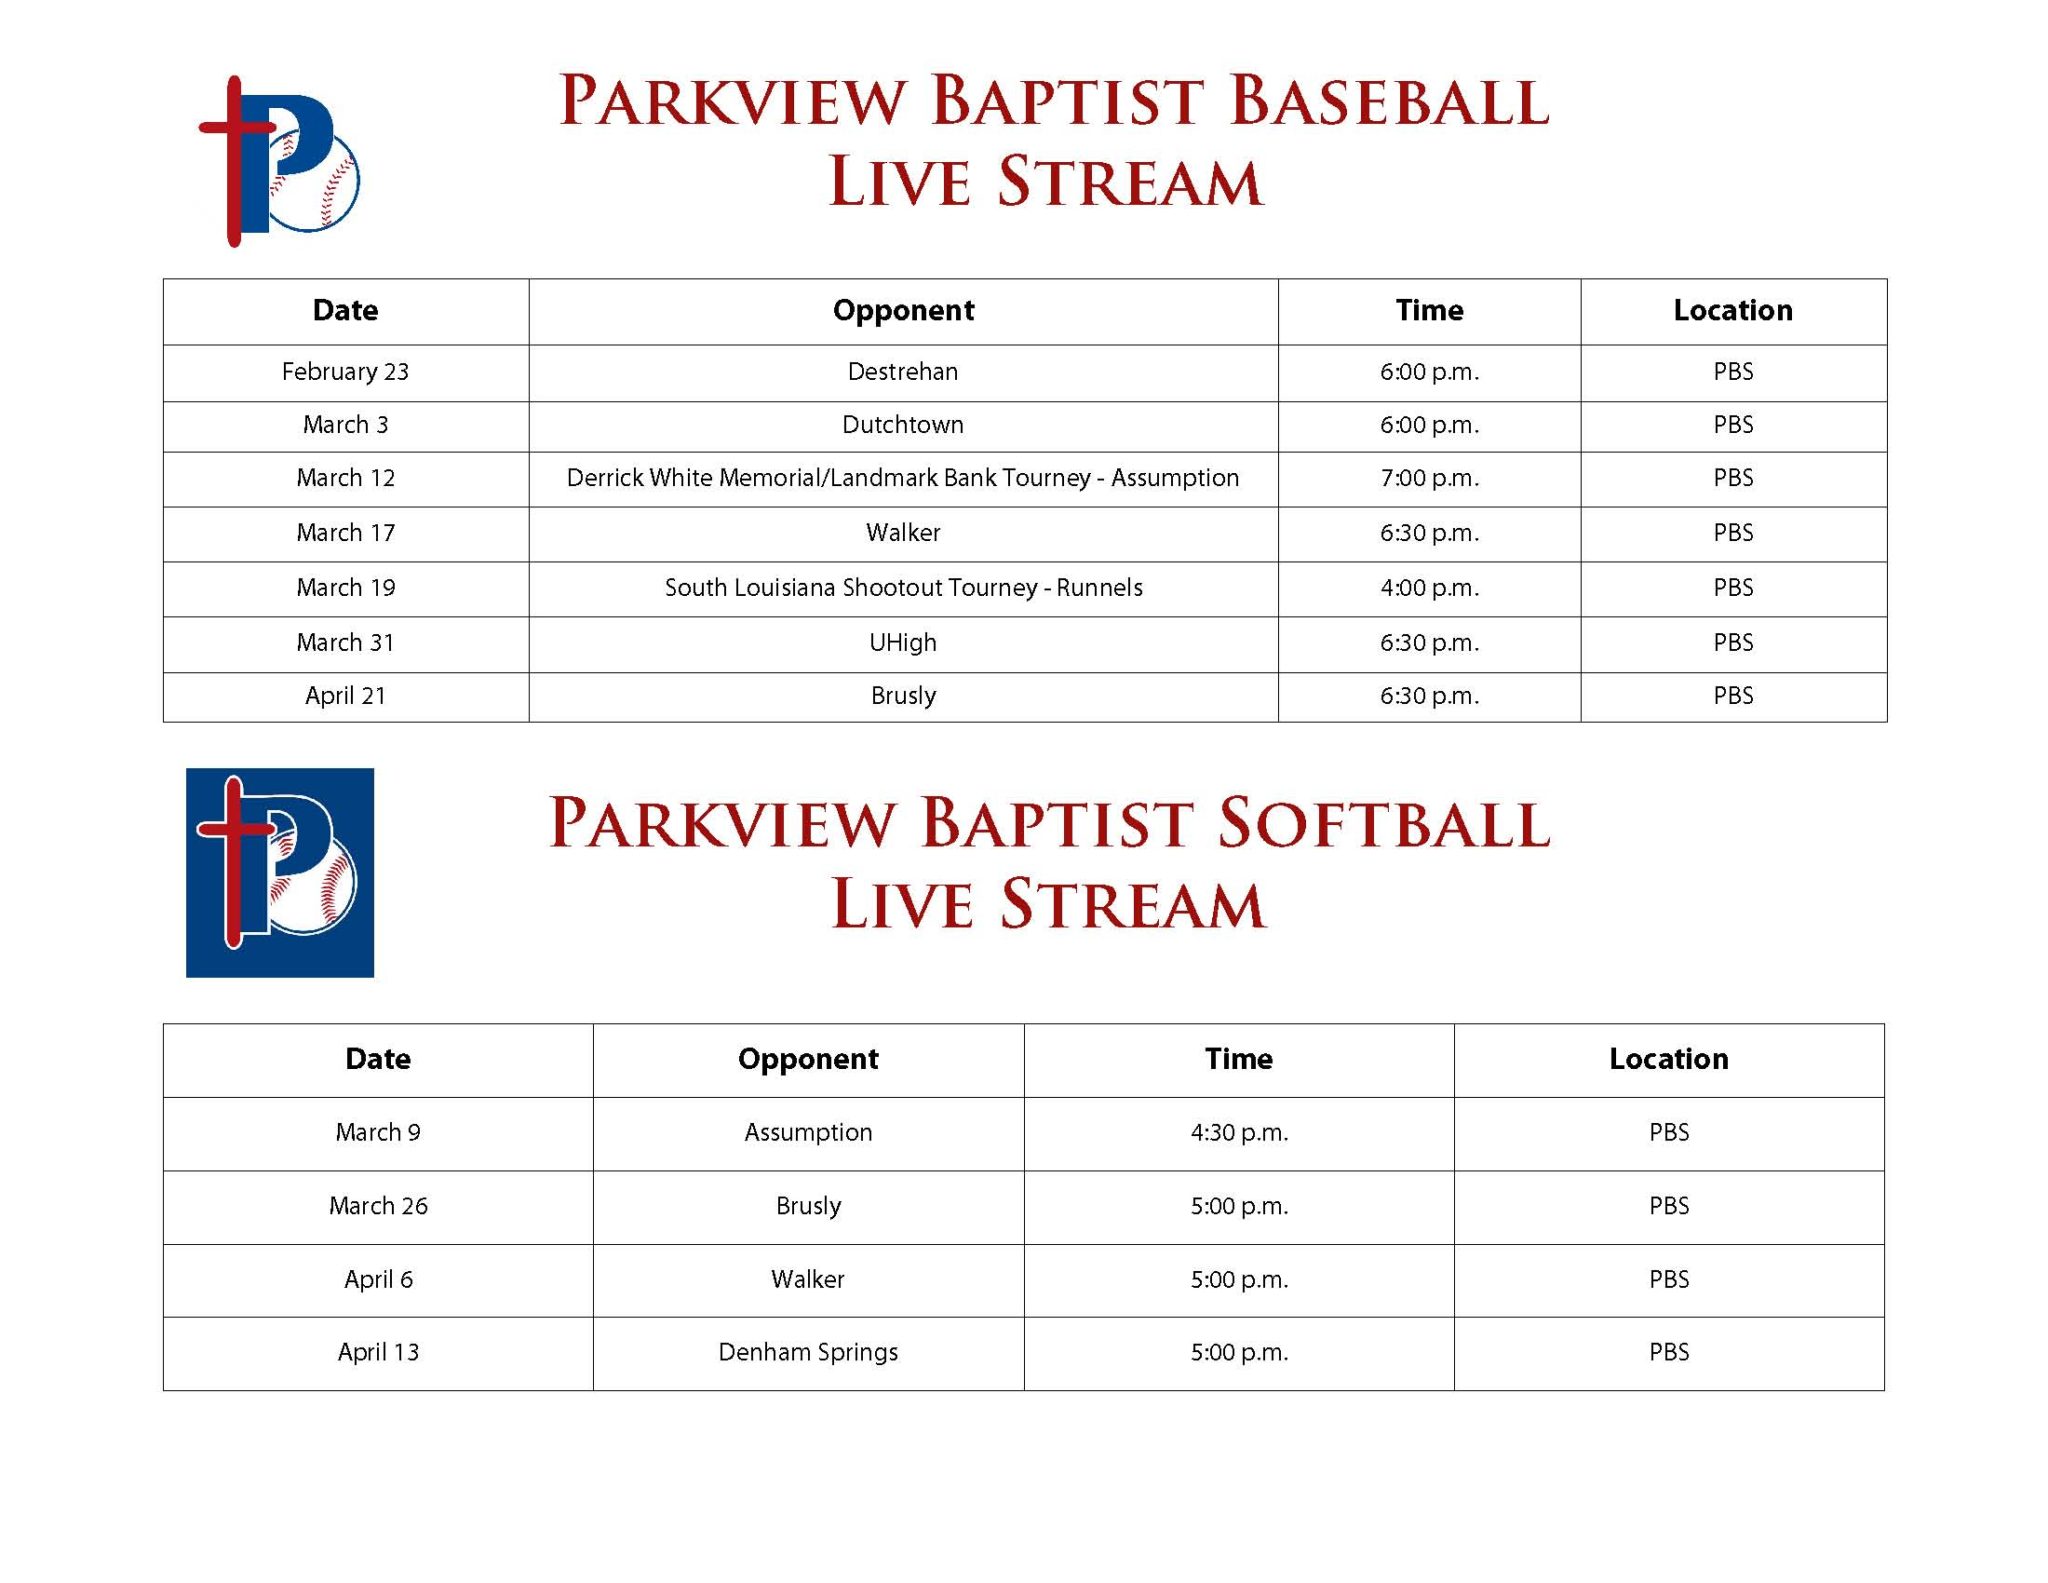 Baseball and Softball Live Stream Schedule Parkview Baptist